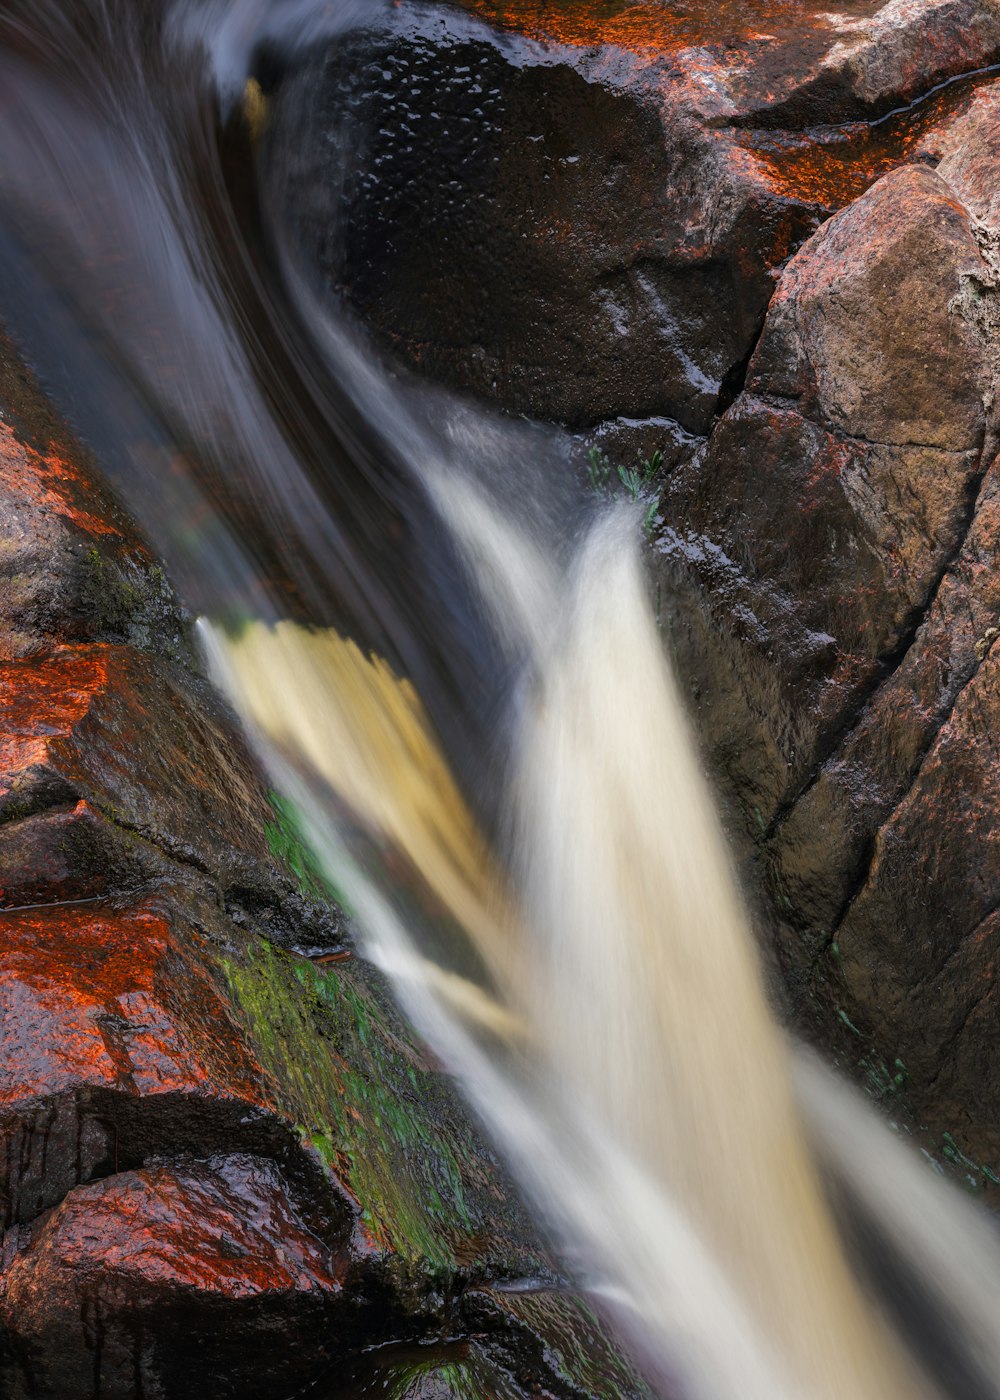 a stream of water running over rocks